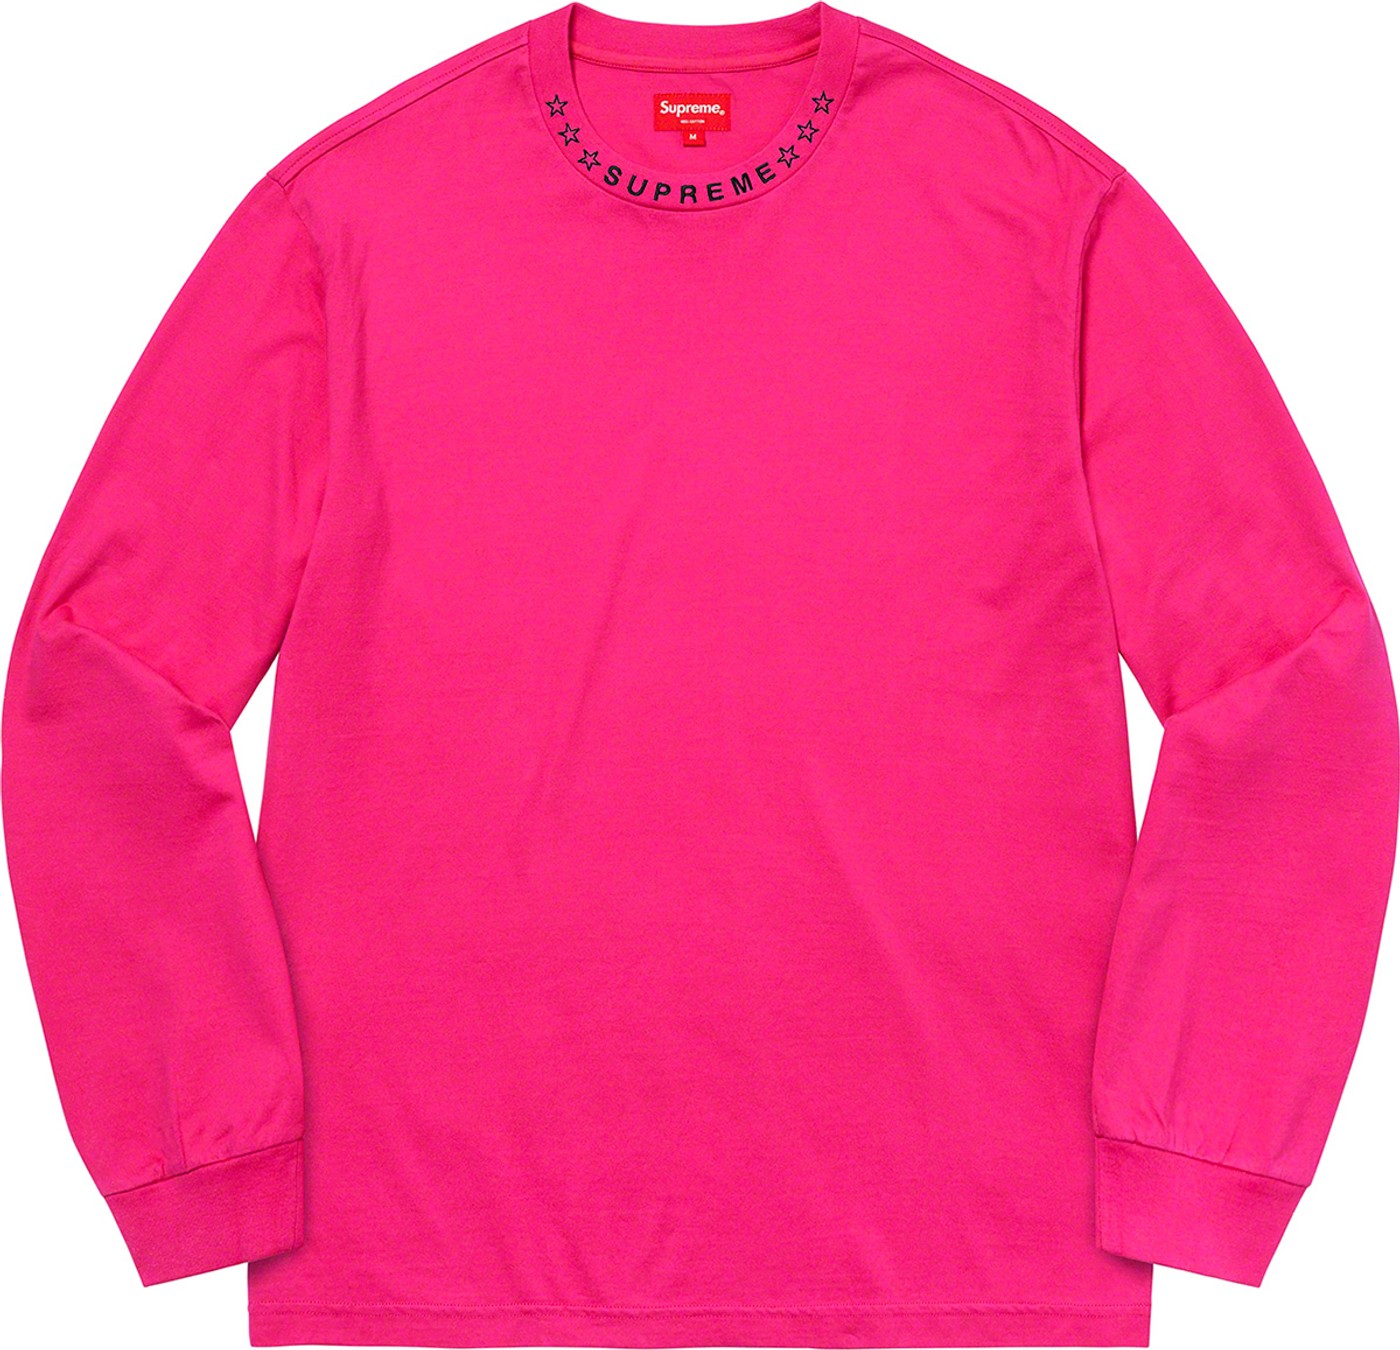 Lady Pink/Supreme S/S Top - Fall/Winter 2021 Preview – Supreme